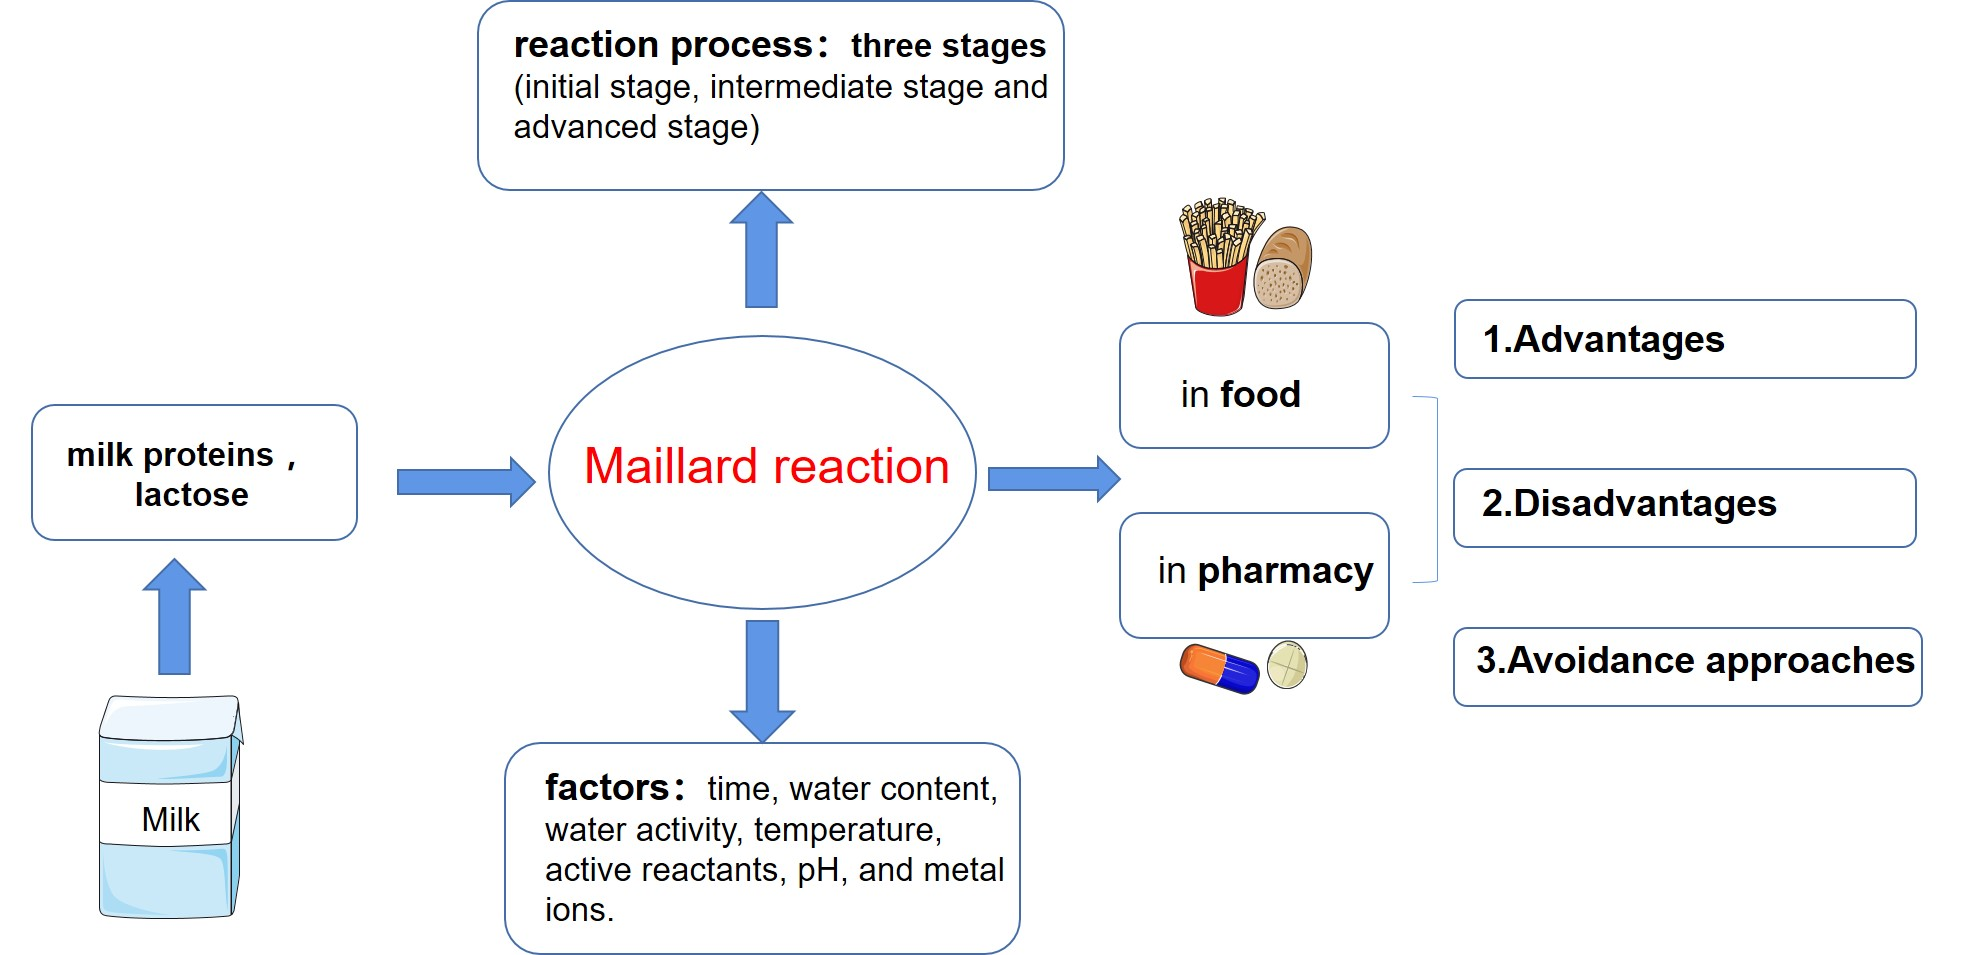 Foods | Free Full-Text | A Literature Review on Maillard Reaction Based on  Milk Proteins and Carbohydrates in Food and Pharmaceutical Products:  Advantages, Disadvantages, and Avoidance Strategies